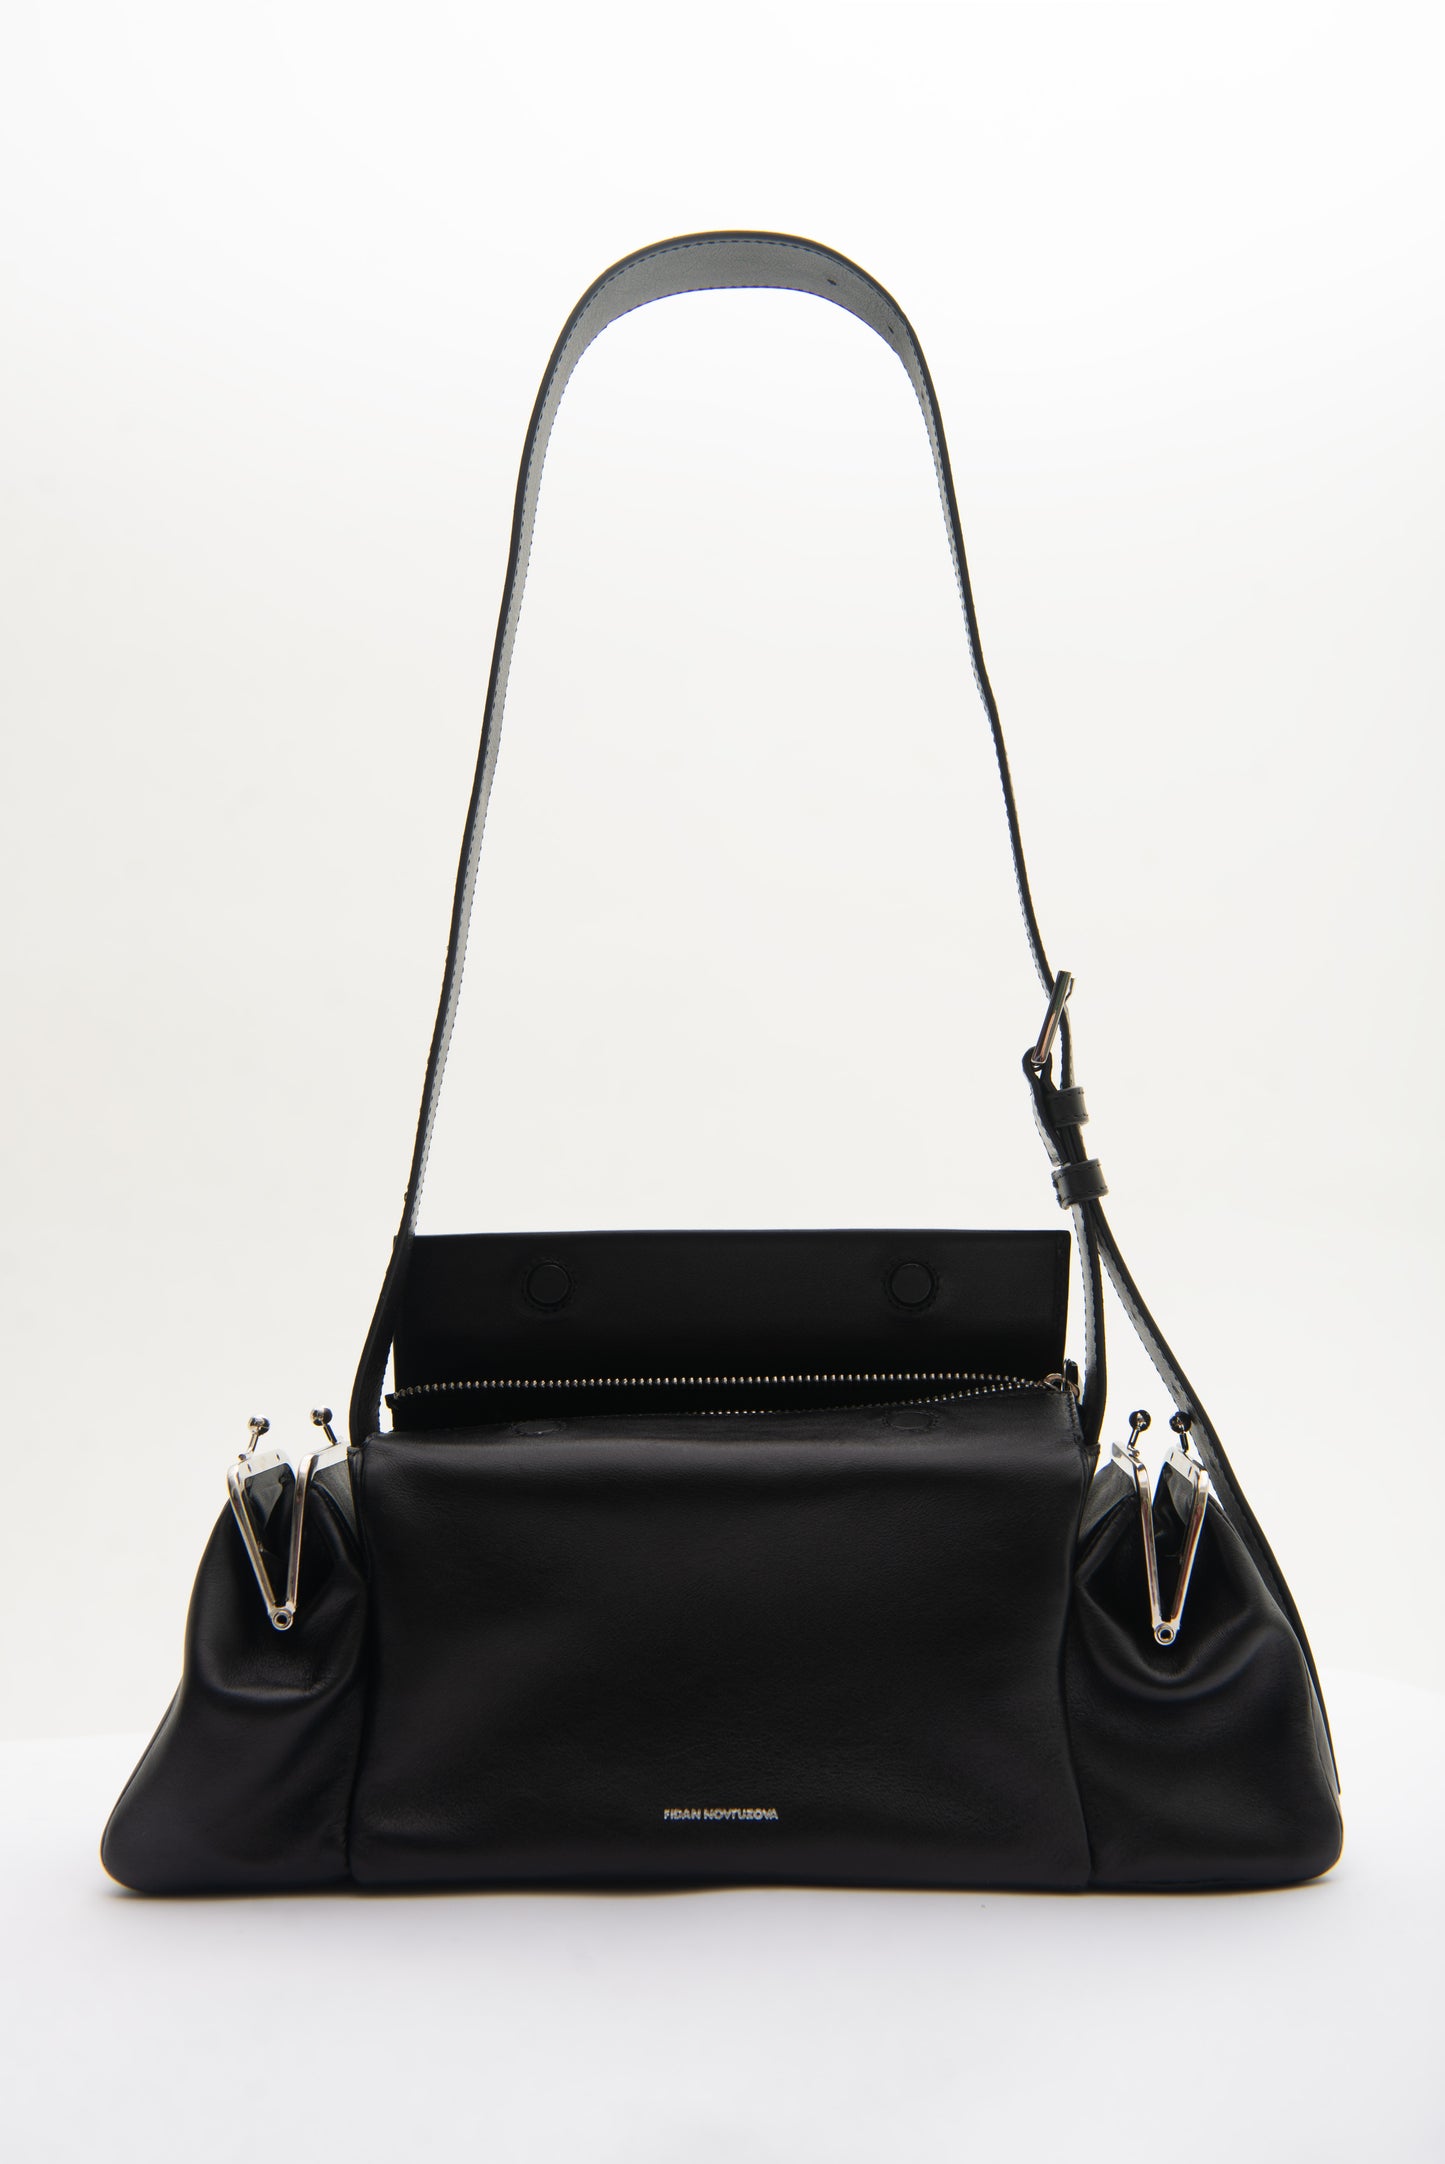 LALA LEATHER BAG IN BLACK